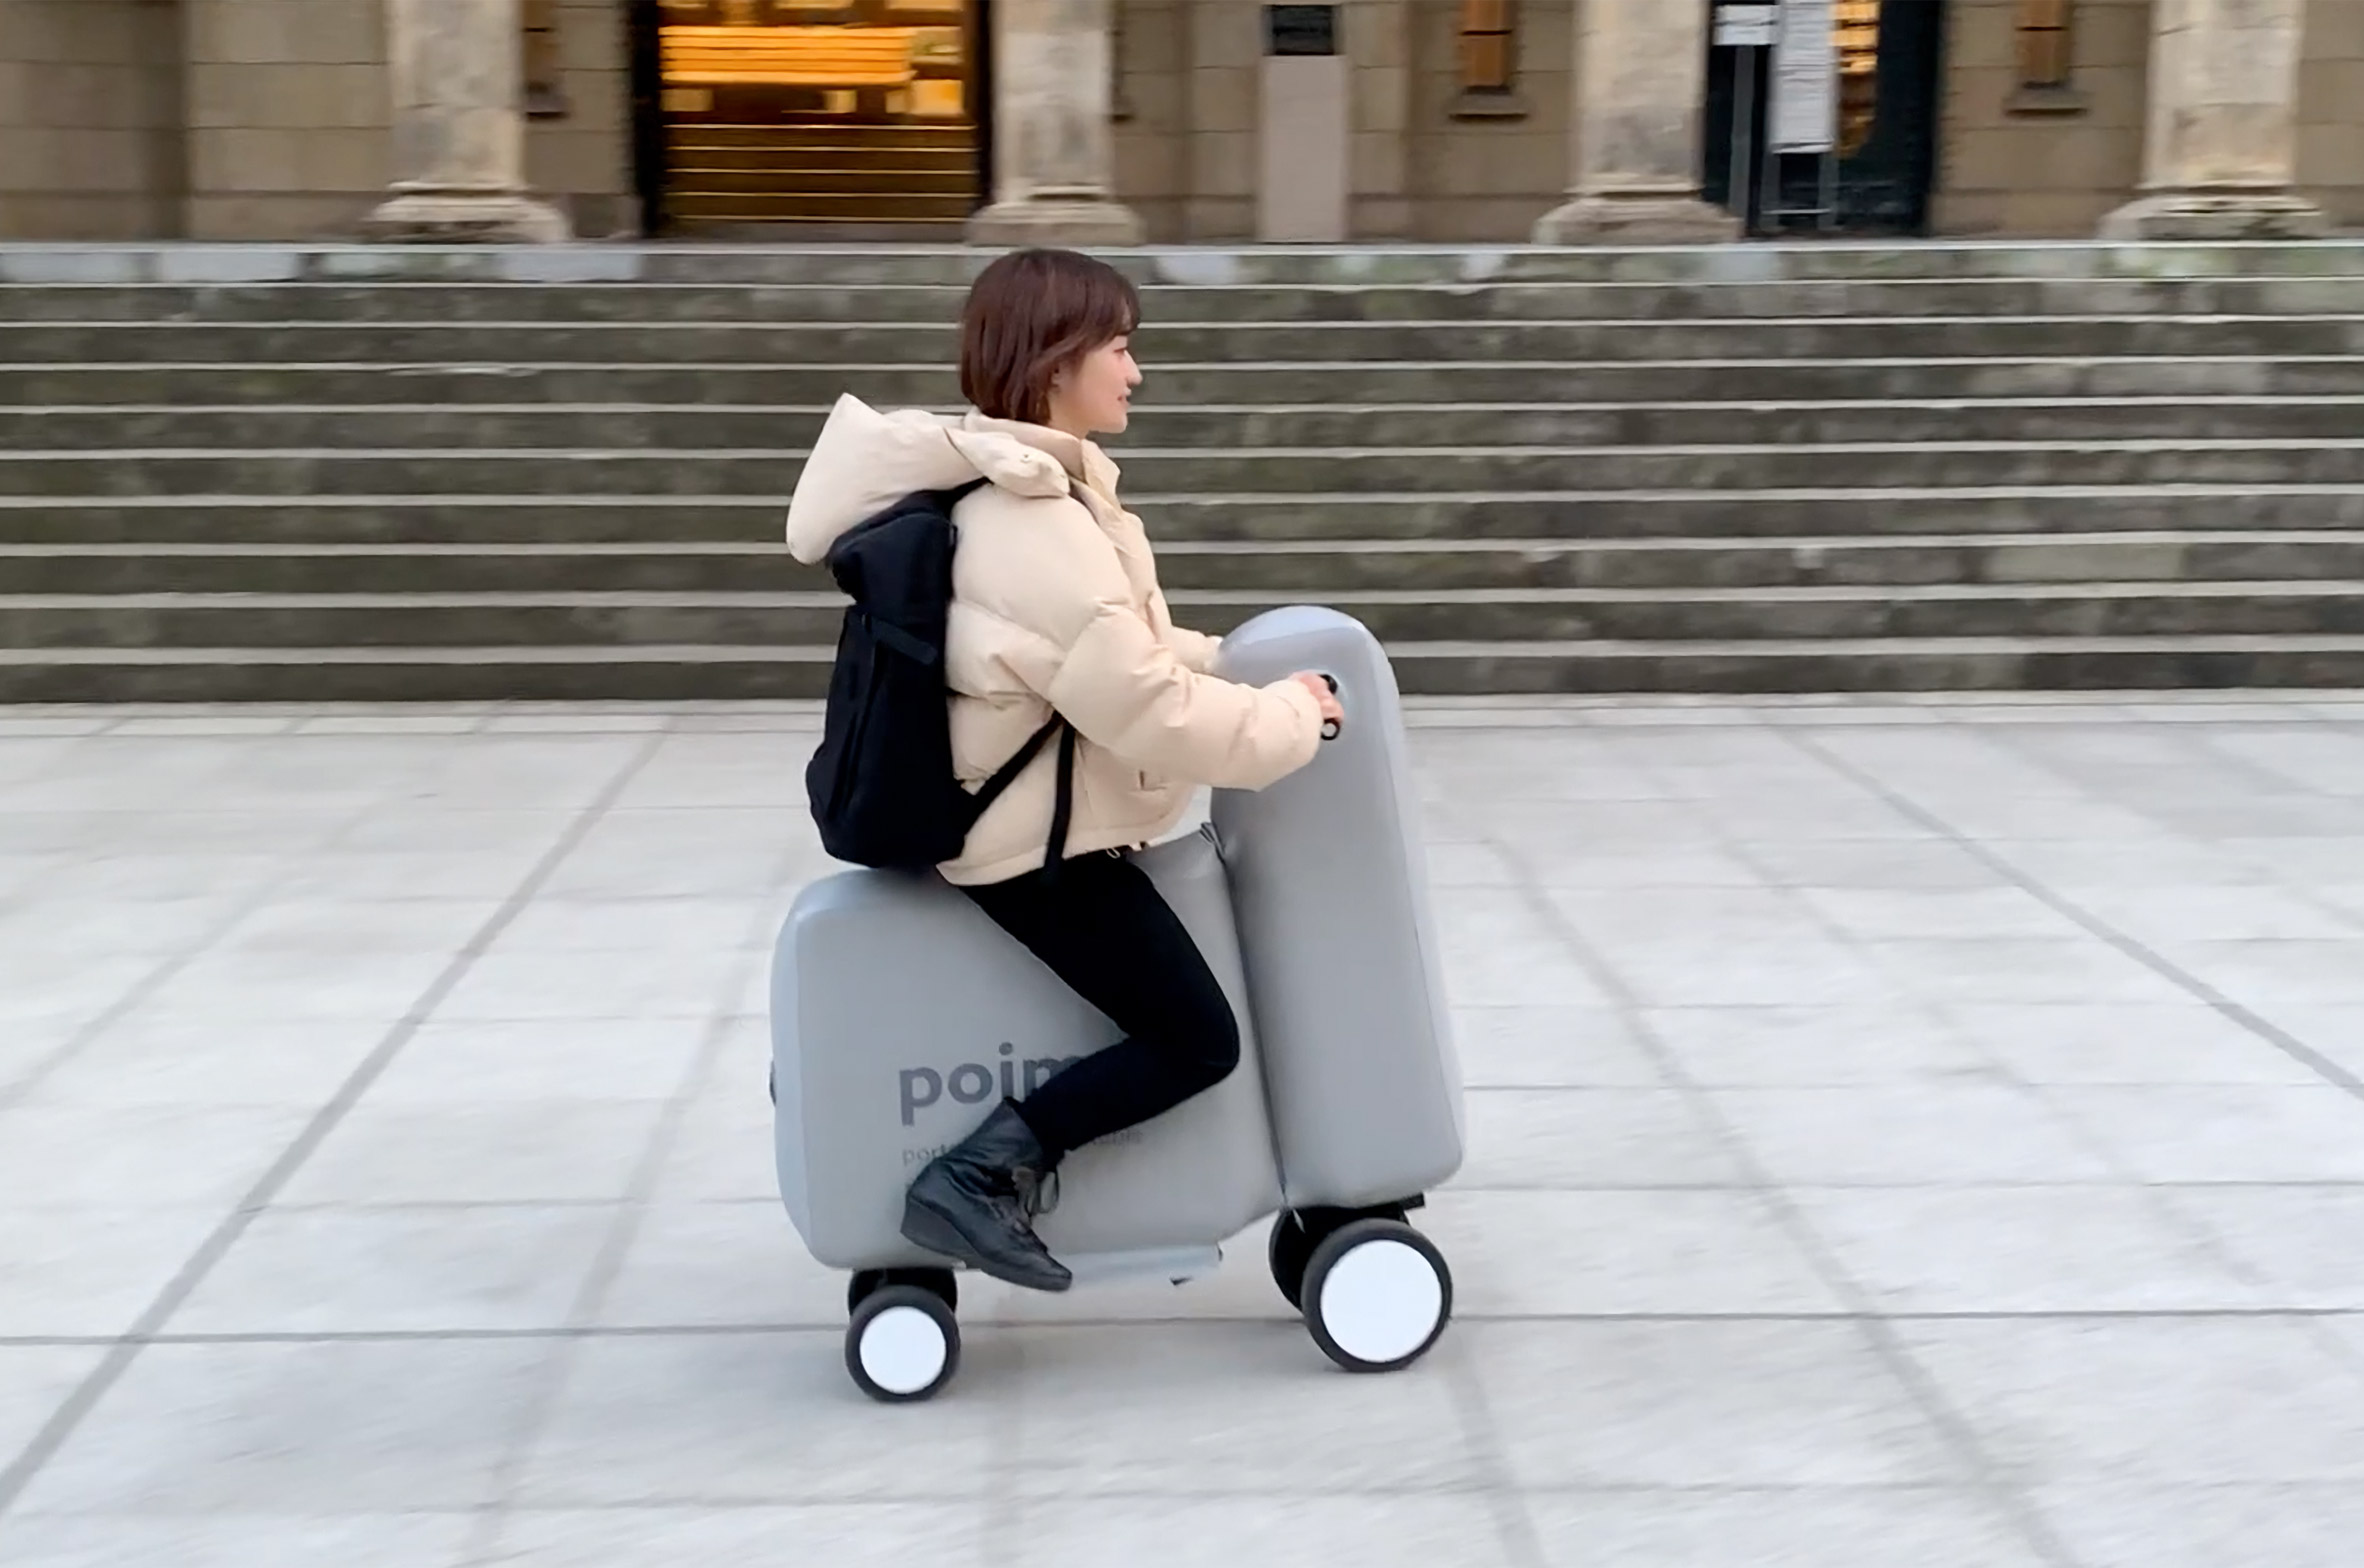 Poimo is an inflatable electric scooter that can be transported inside a backpack